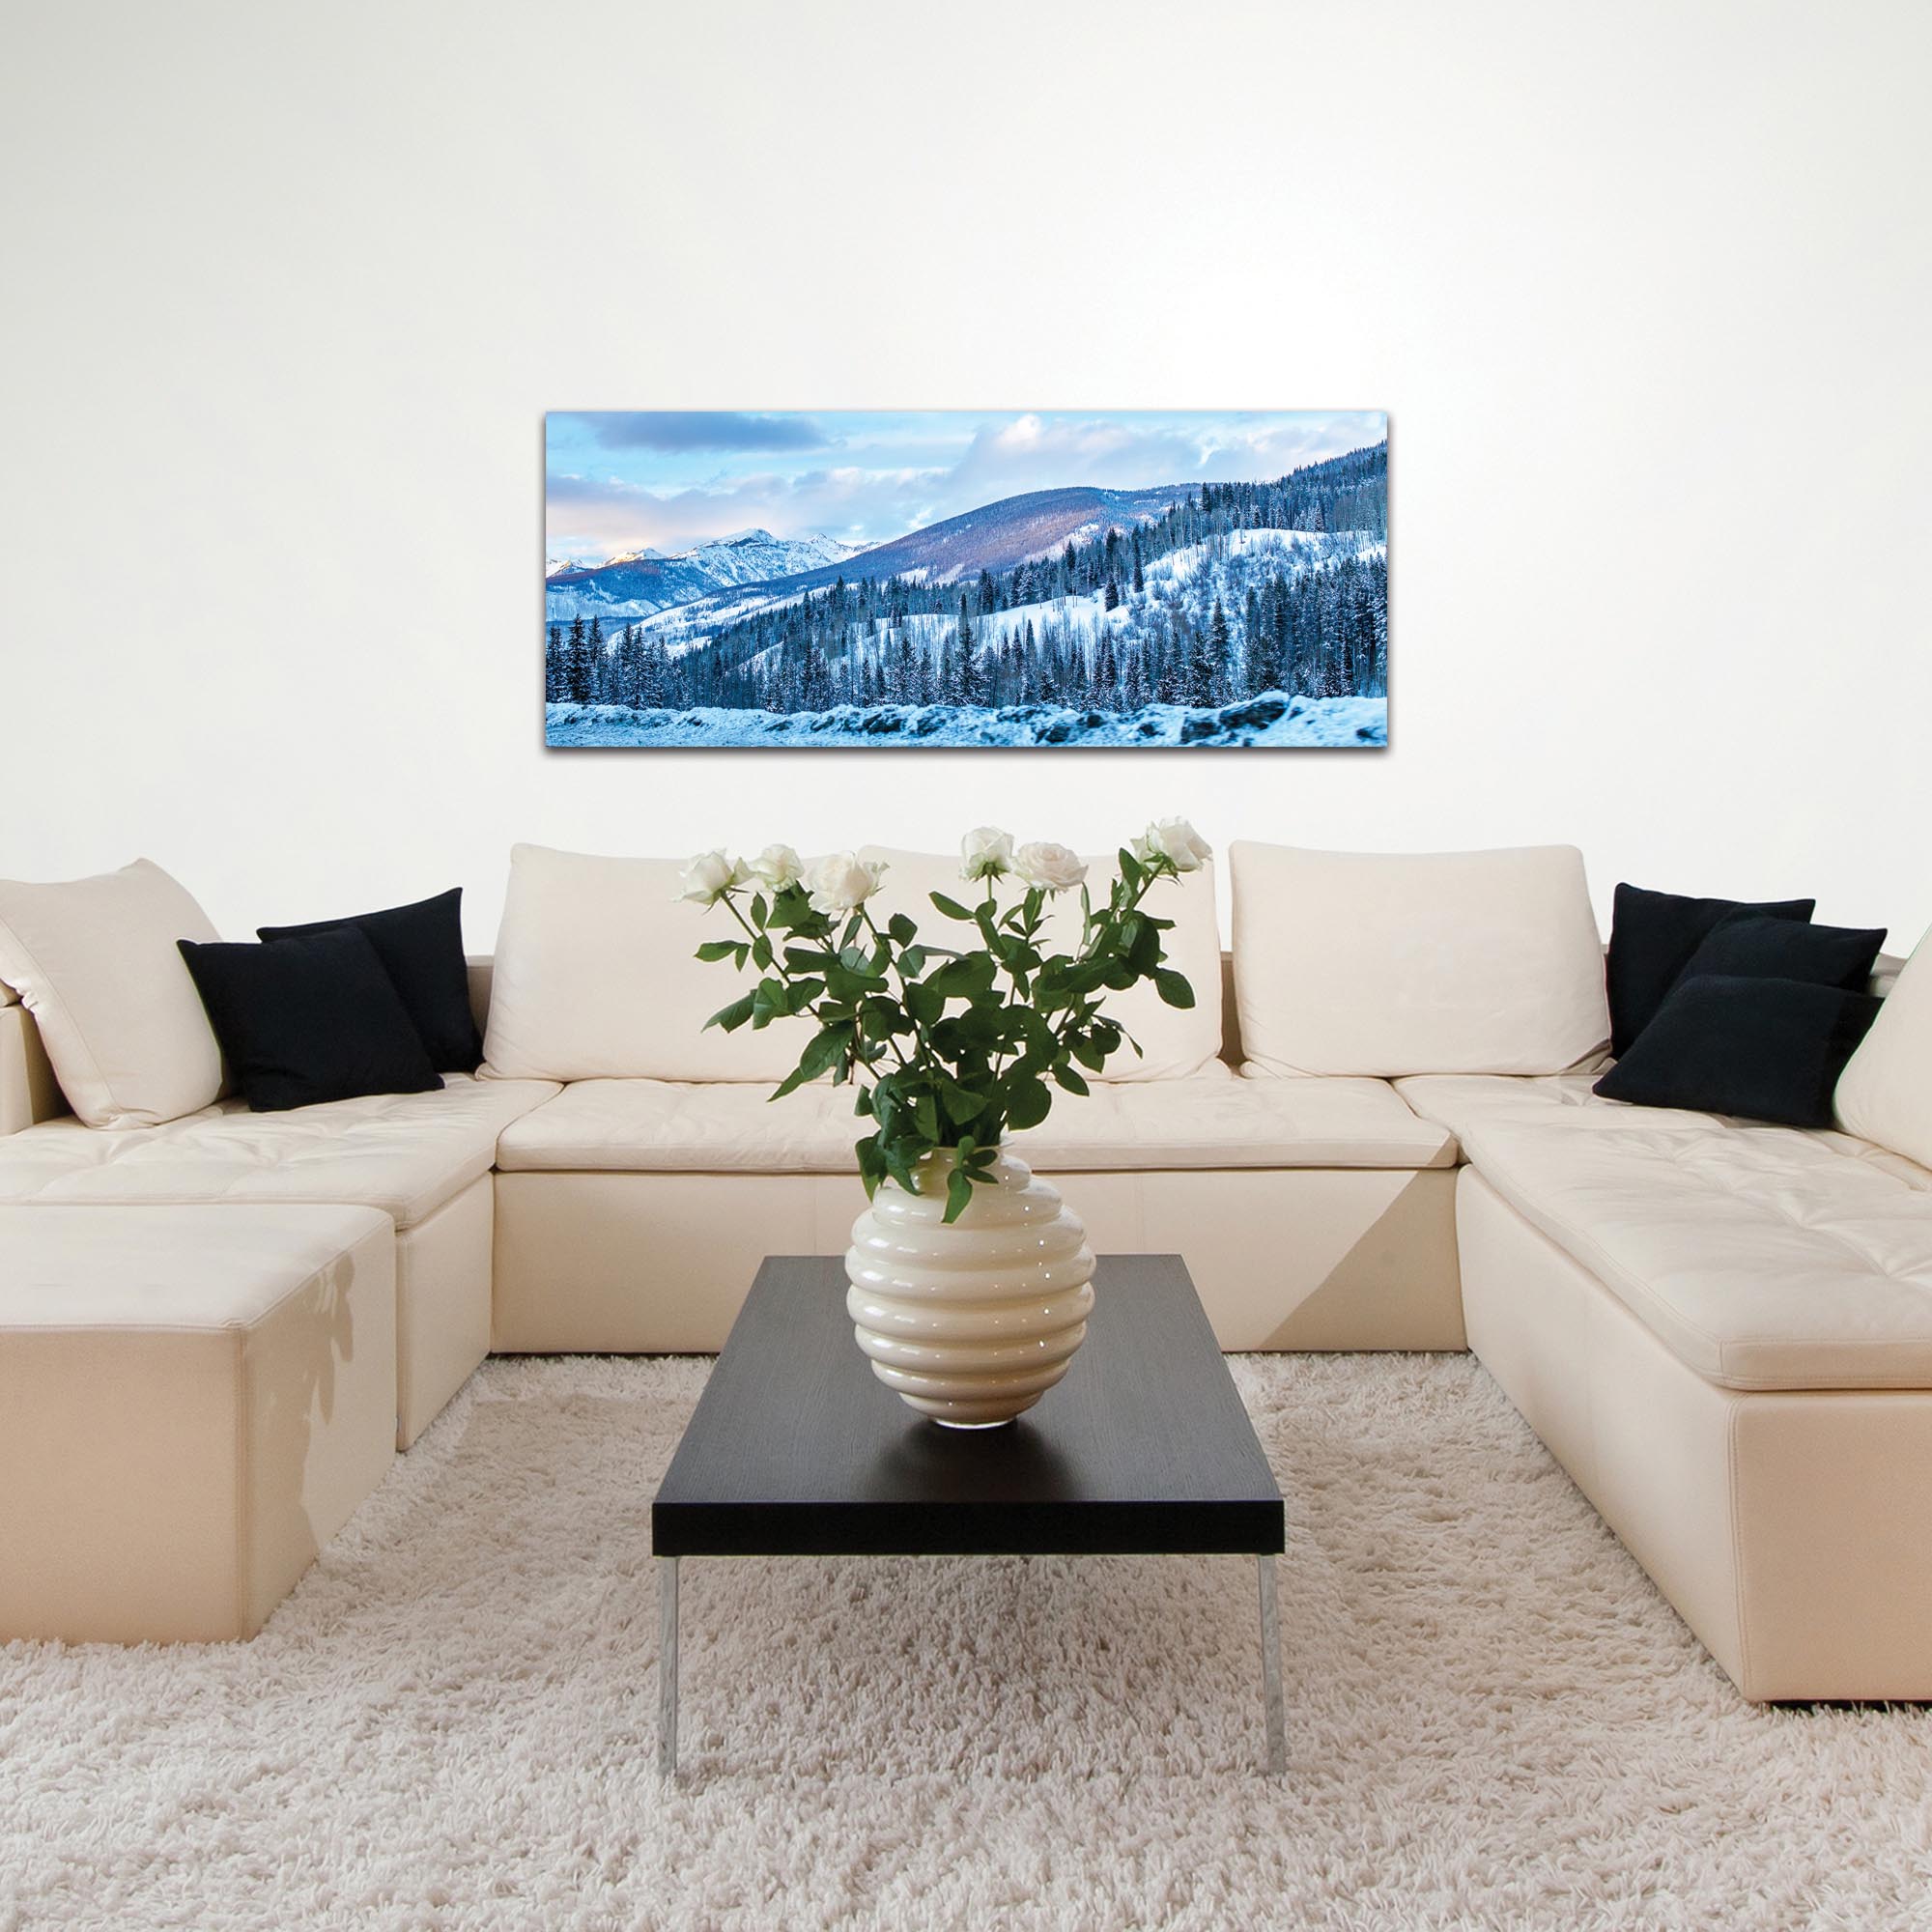 Landscape Photography 'The Slopes' - Winter Scene Art on Metal or Plexiglass - Lifestyle View